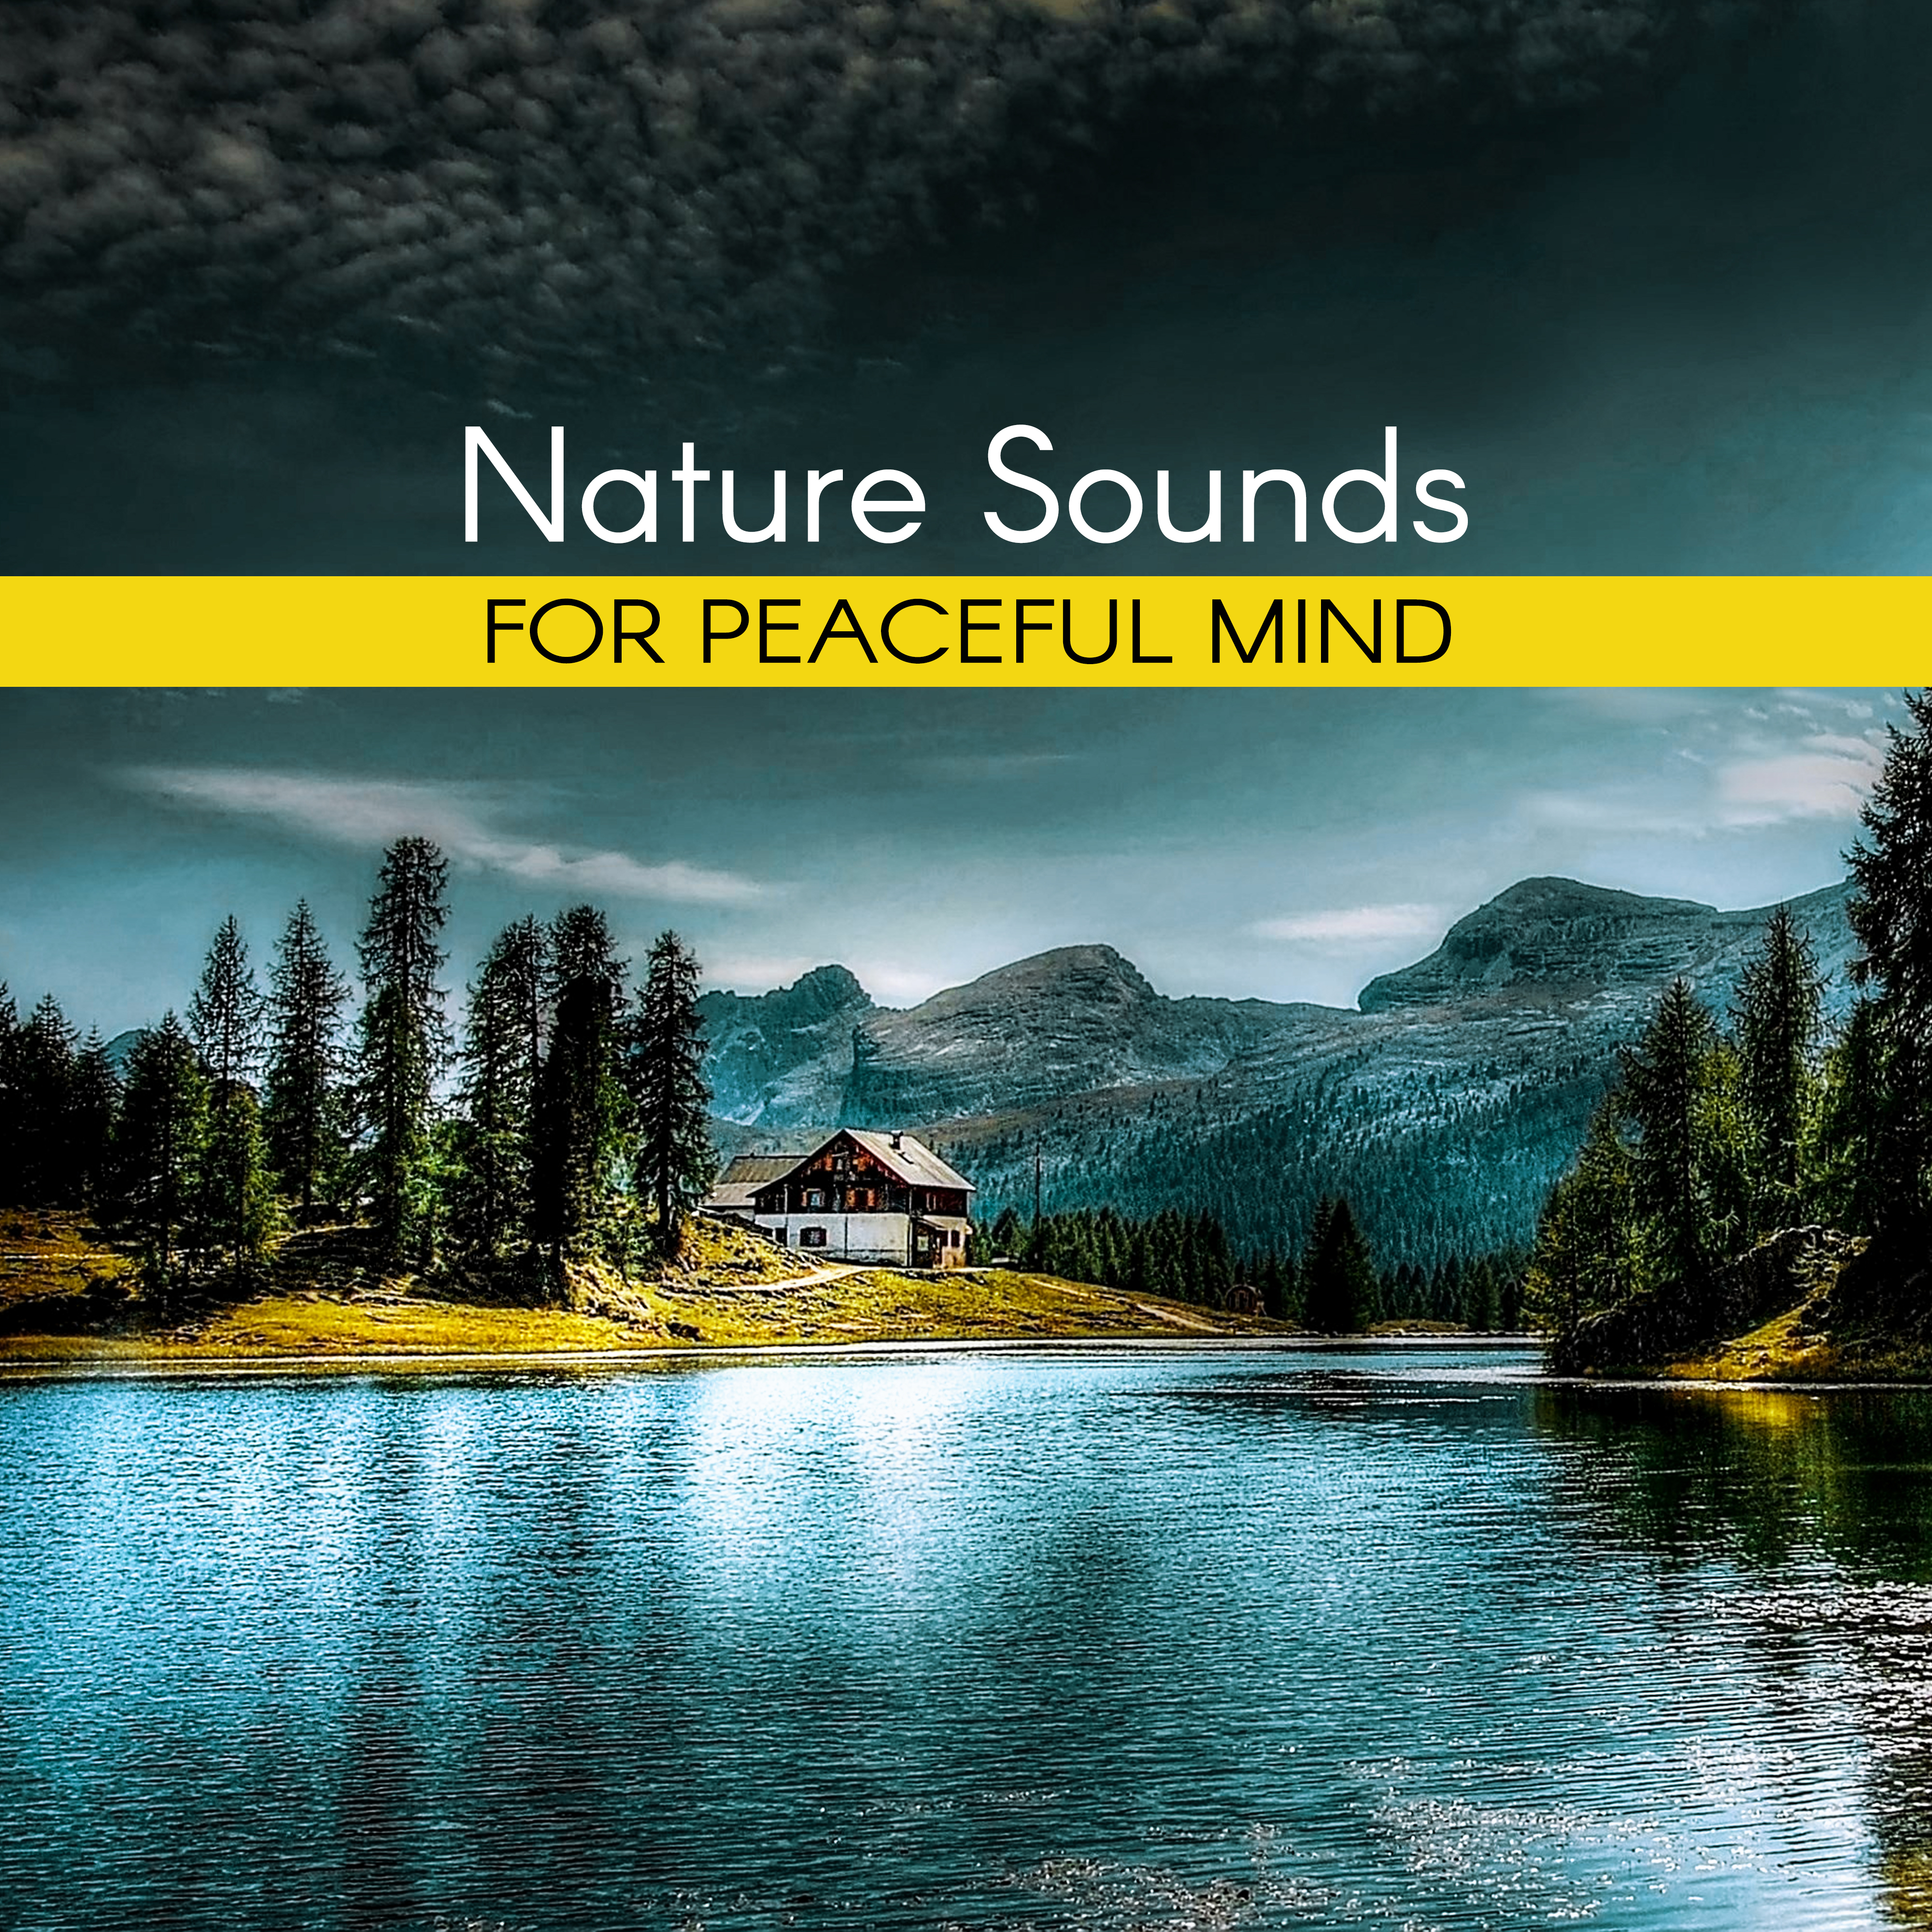 Nature Sounds for Peaceful Mind  Inner Calmness, Harmony Waves, Water Sounds to Relax, New Age Music